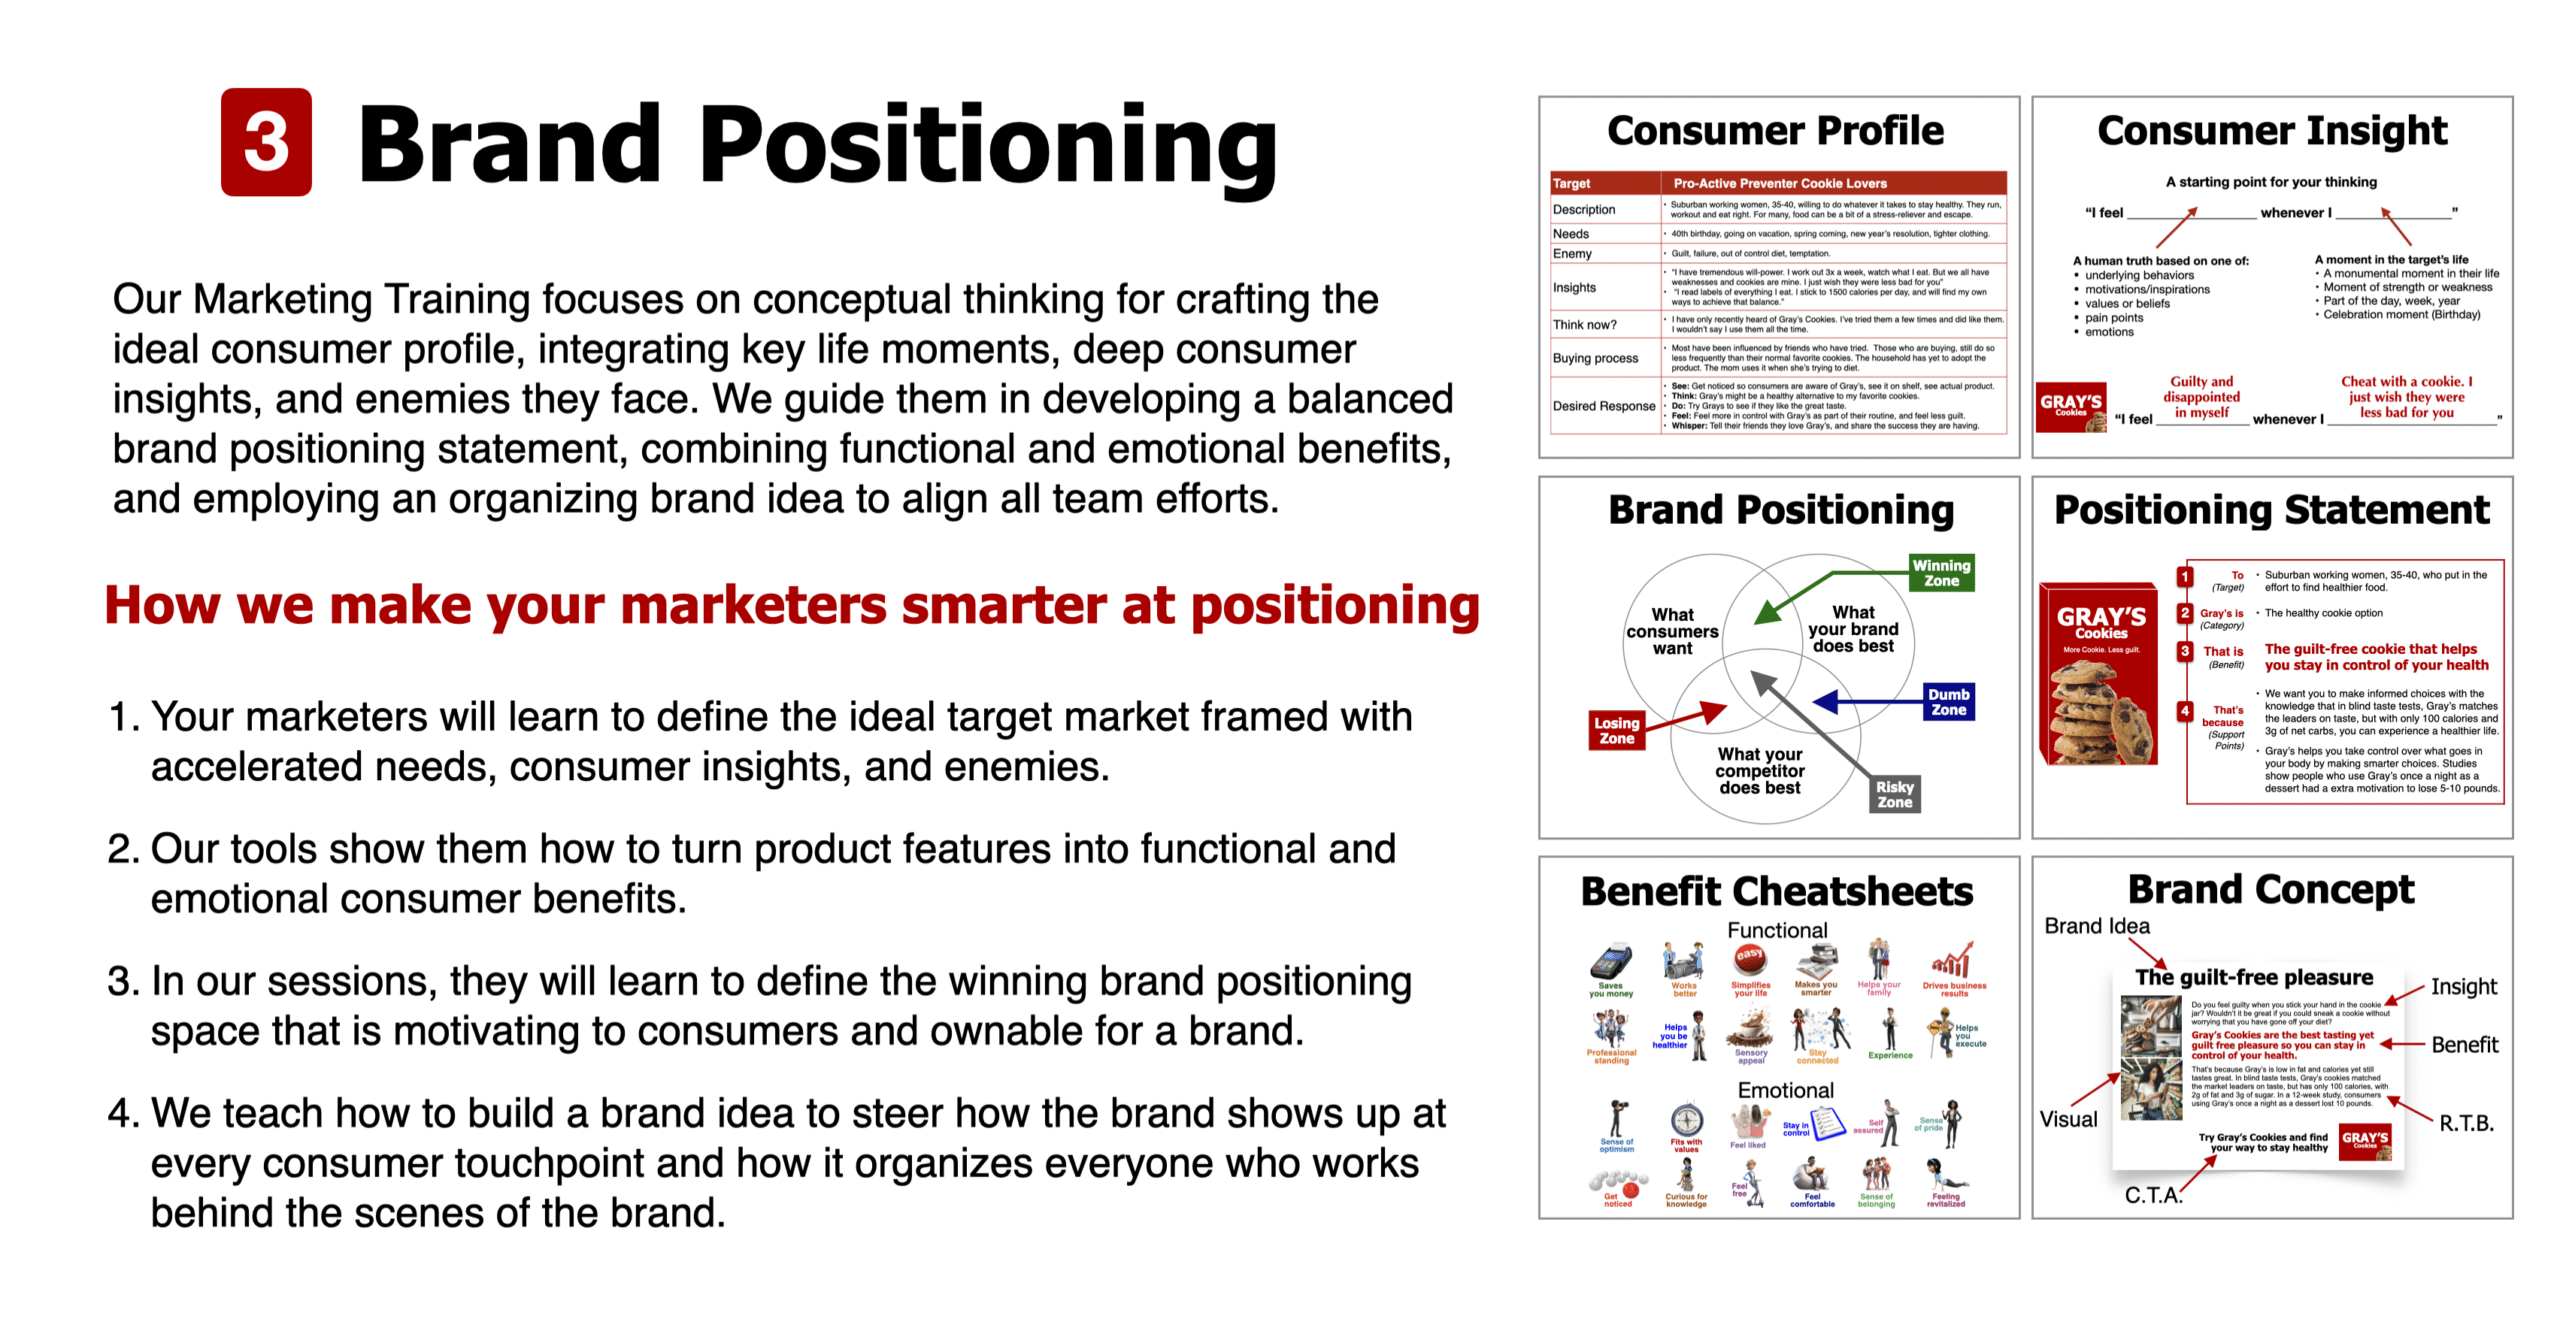 Brand Positioning Tools in our Brand Management Training